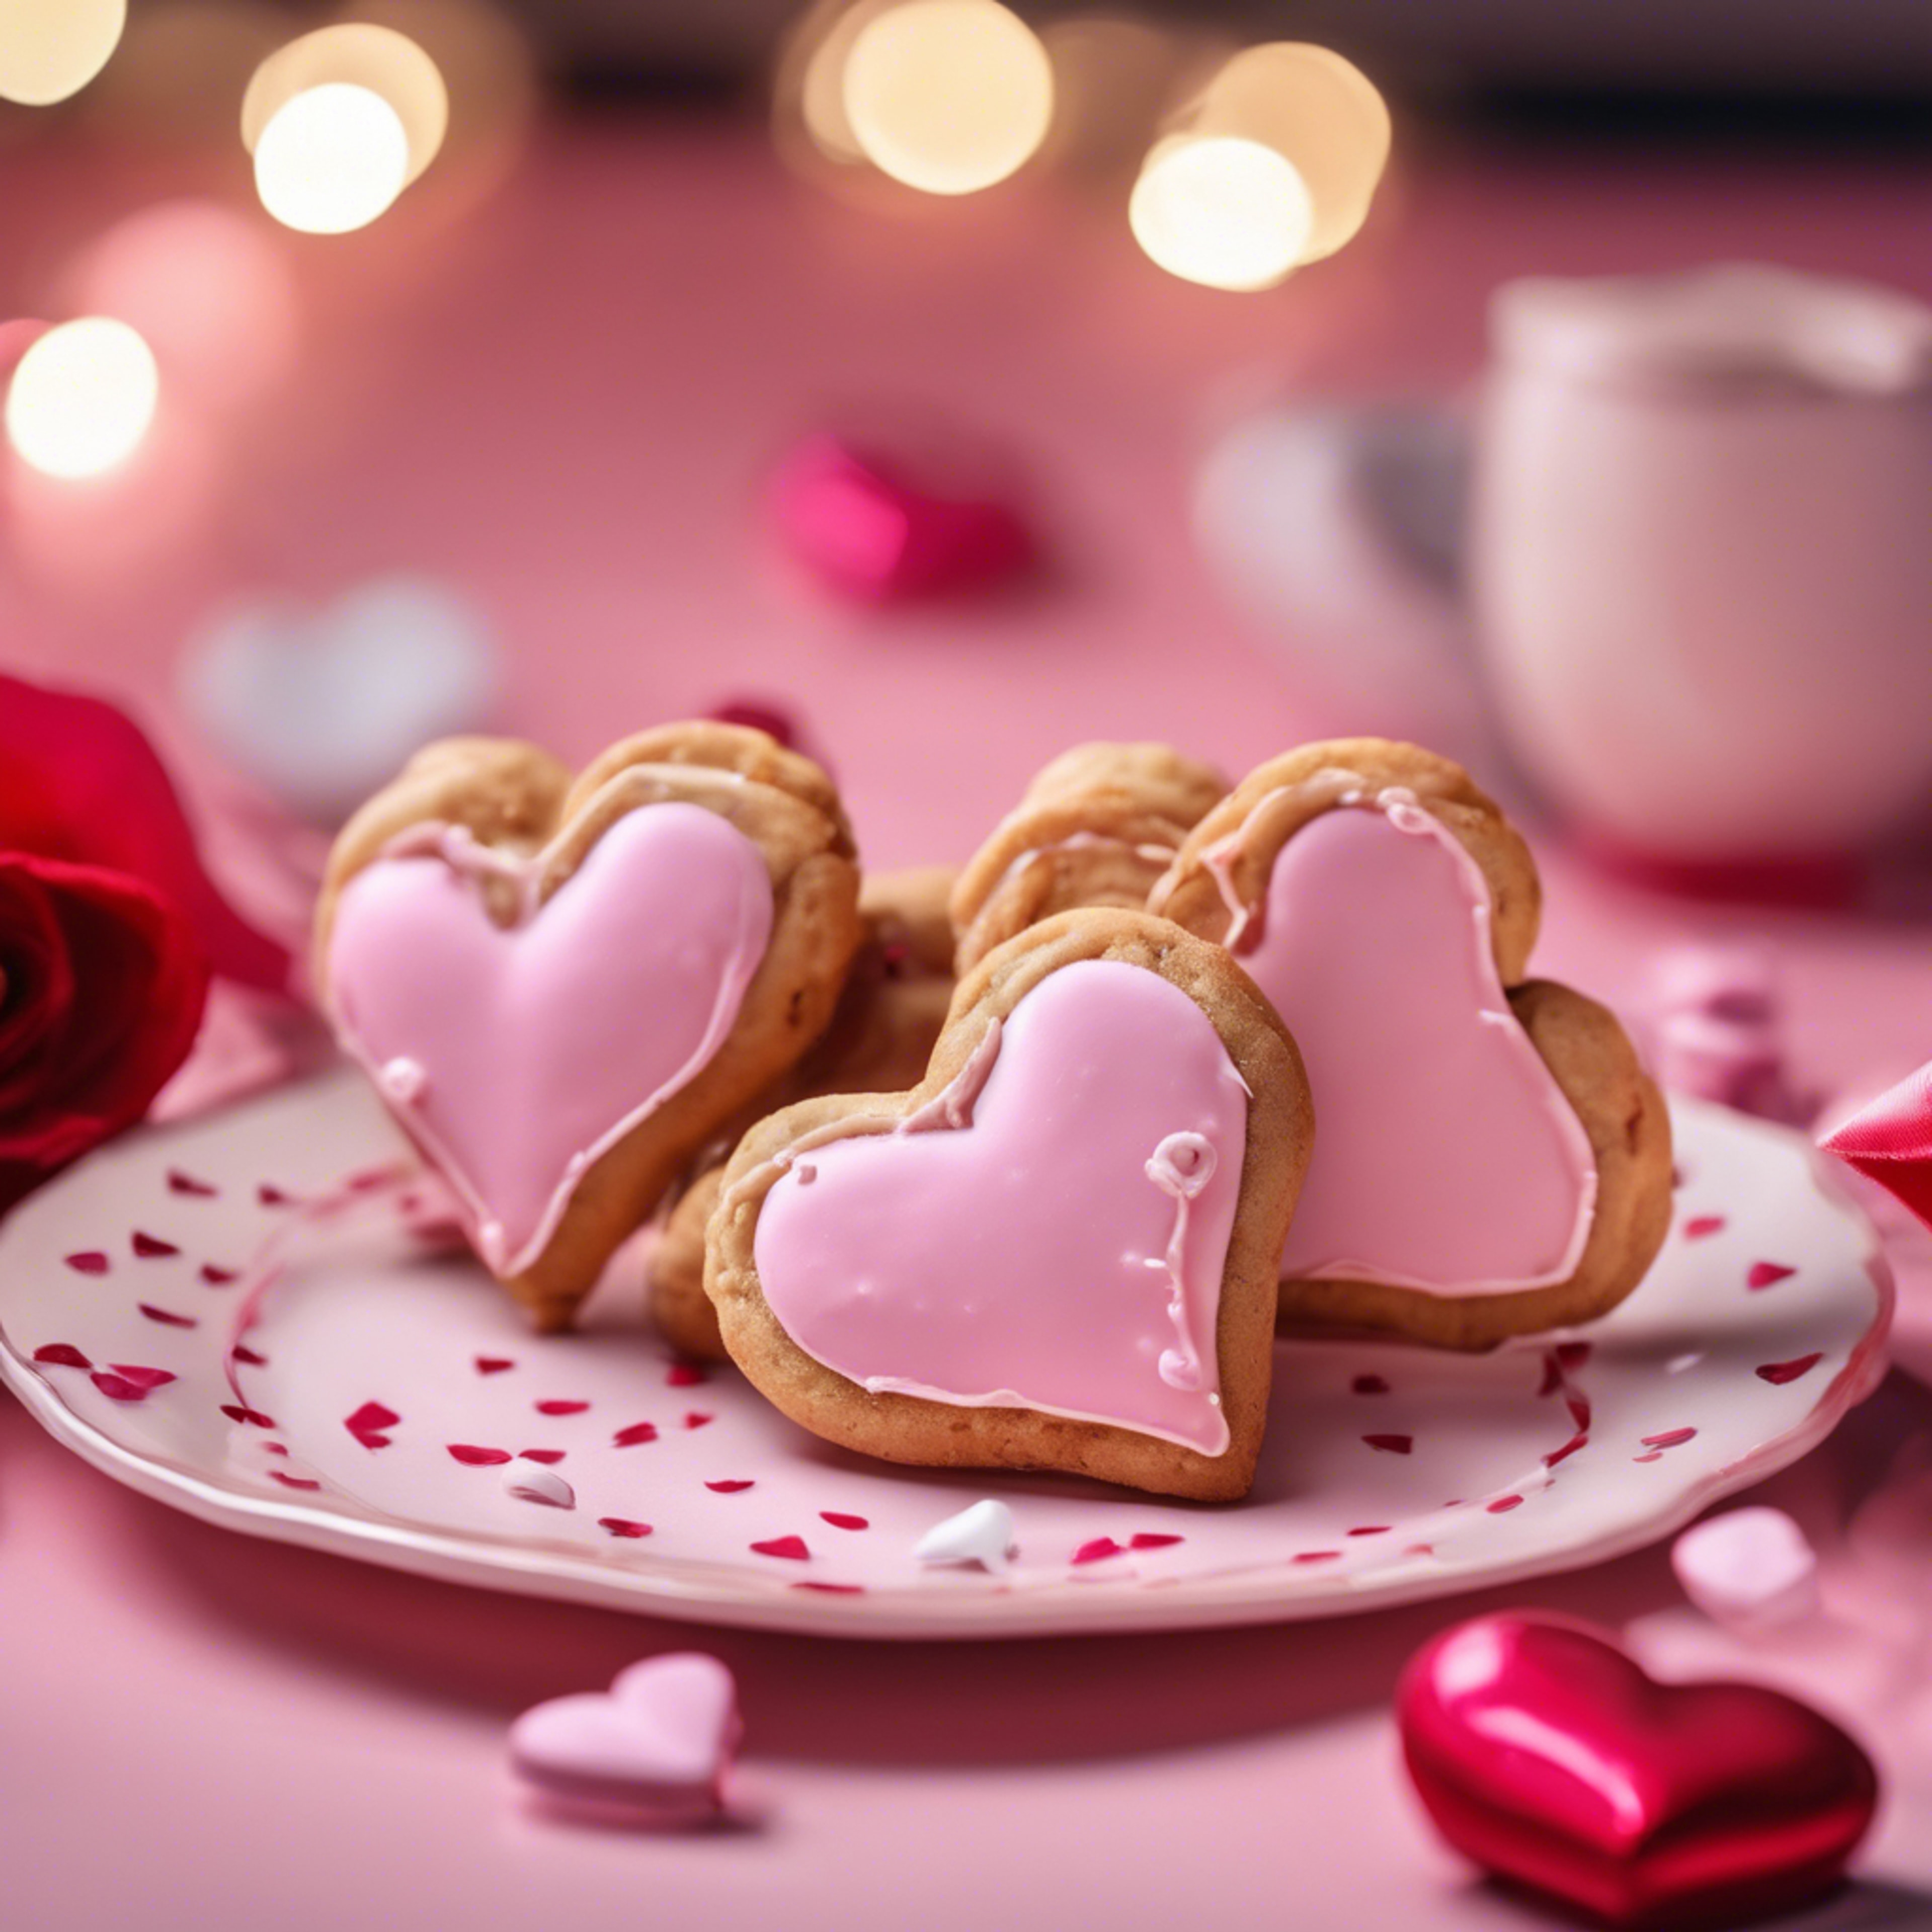 A pair of heart-shaped frosted cookies on a vibrant Valentine's day setting. Tapet[699c1bd667c44183af85]